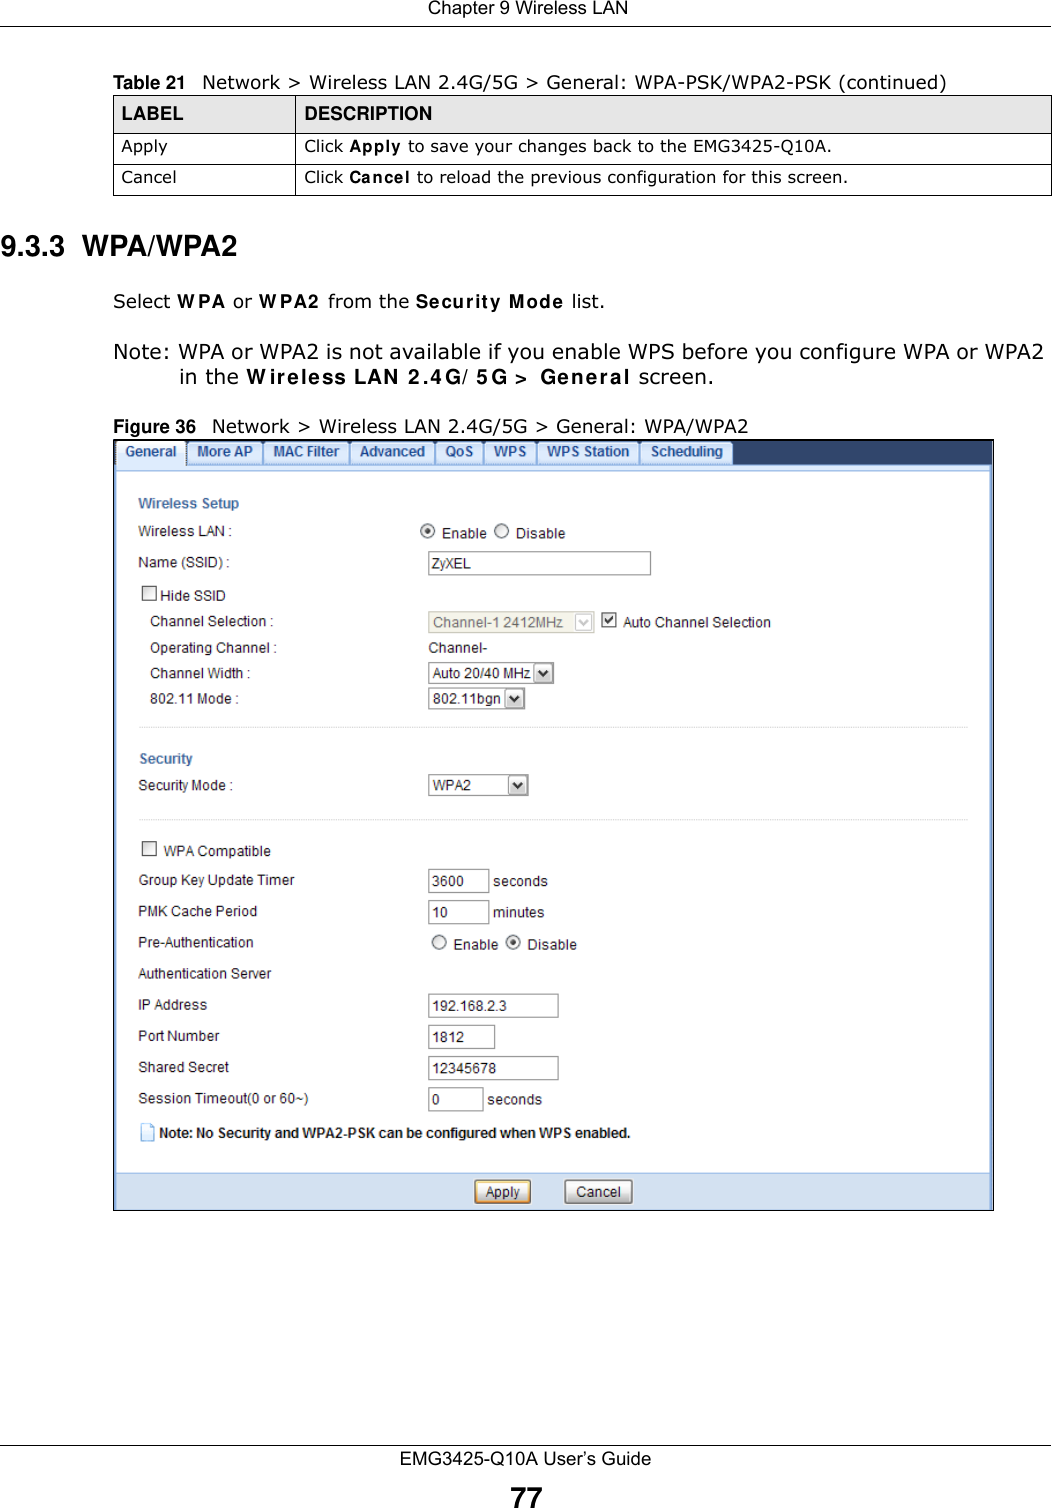  Chapter 9 Wireless LANEMG3425-Q10A User’s Guide779.3.3  WPA/WPA2Select W PA or W PA2  from the Se curit y Mode  list. Note: WPA or WPA2 is not available if you enable WPS before you configure WPA or WPA2 in the W ireless LAN  2 .4 G/ 5 G &gt;  Ge nera l screen.Figure 36   Network &gt; Wireless LAN 2.4G/5G &gt; General: WPA/WPA2Apply Click Apply to save your changes back to the EMG3425-Q10A.Cancel Click Cancel to reload the previous configuration for this screen.Table 21   Network &gt; Wireless LAN 2.4G/5G &gt; General: WPA-PSK/WPA2-PSK (continued)LABEL DESCRIPTION